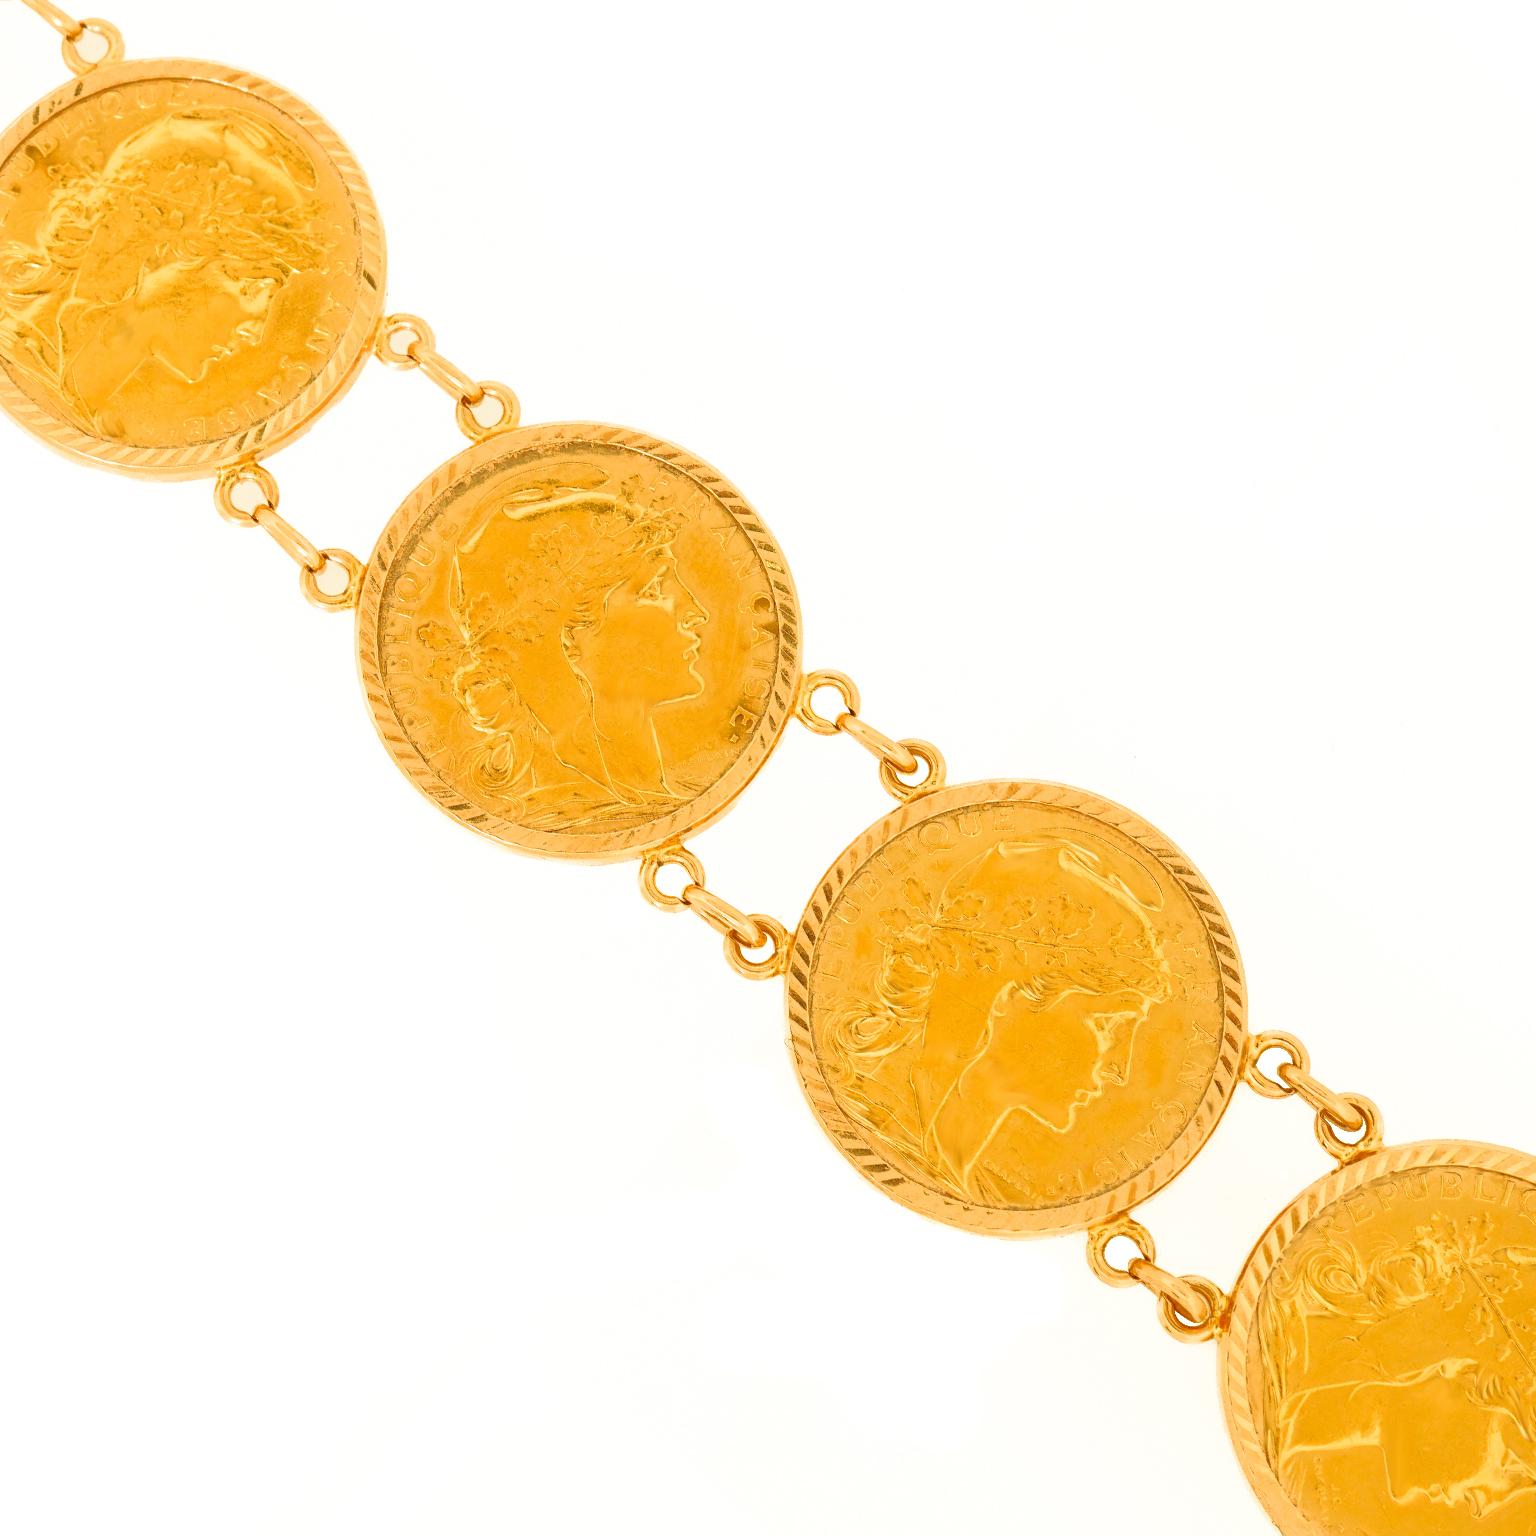 French Coin Bracelet 22k c1920s For Sale 4